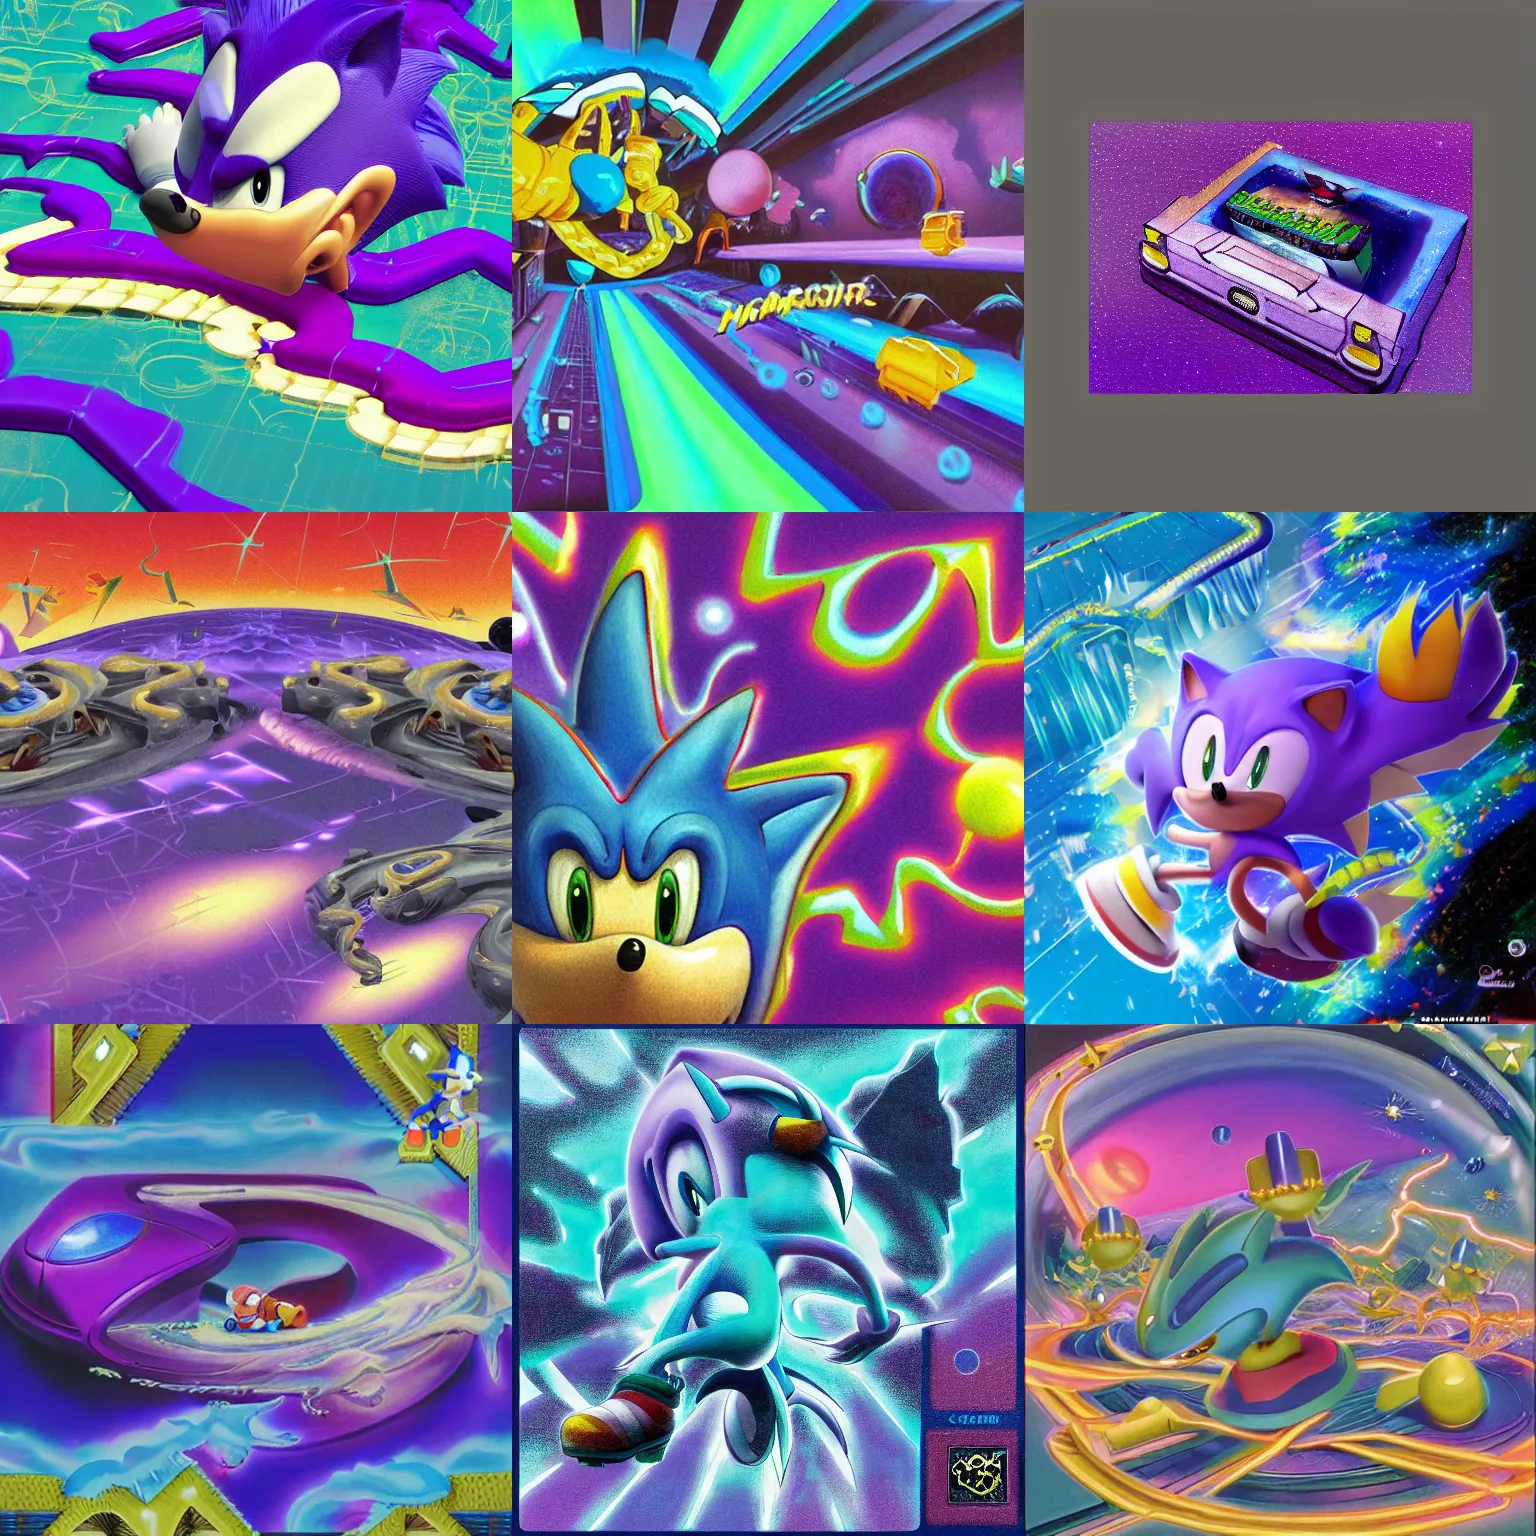 Prompt: dreaming of sonic hedgehog portrait deconstructivist claymation scifi matte painting landscape of a surreal stars, retro moulded professional soft pastels high quality airbrush art album cover of a liquid dissolving airbrush art lsd sonic the hedgehog swimming through cyberspace purple teal checkerboard background 1 9 9 0 s 1 9 9 2 sega genesis video game album cover